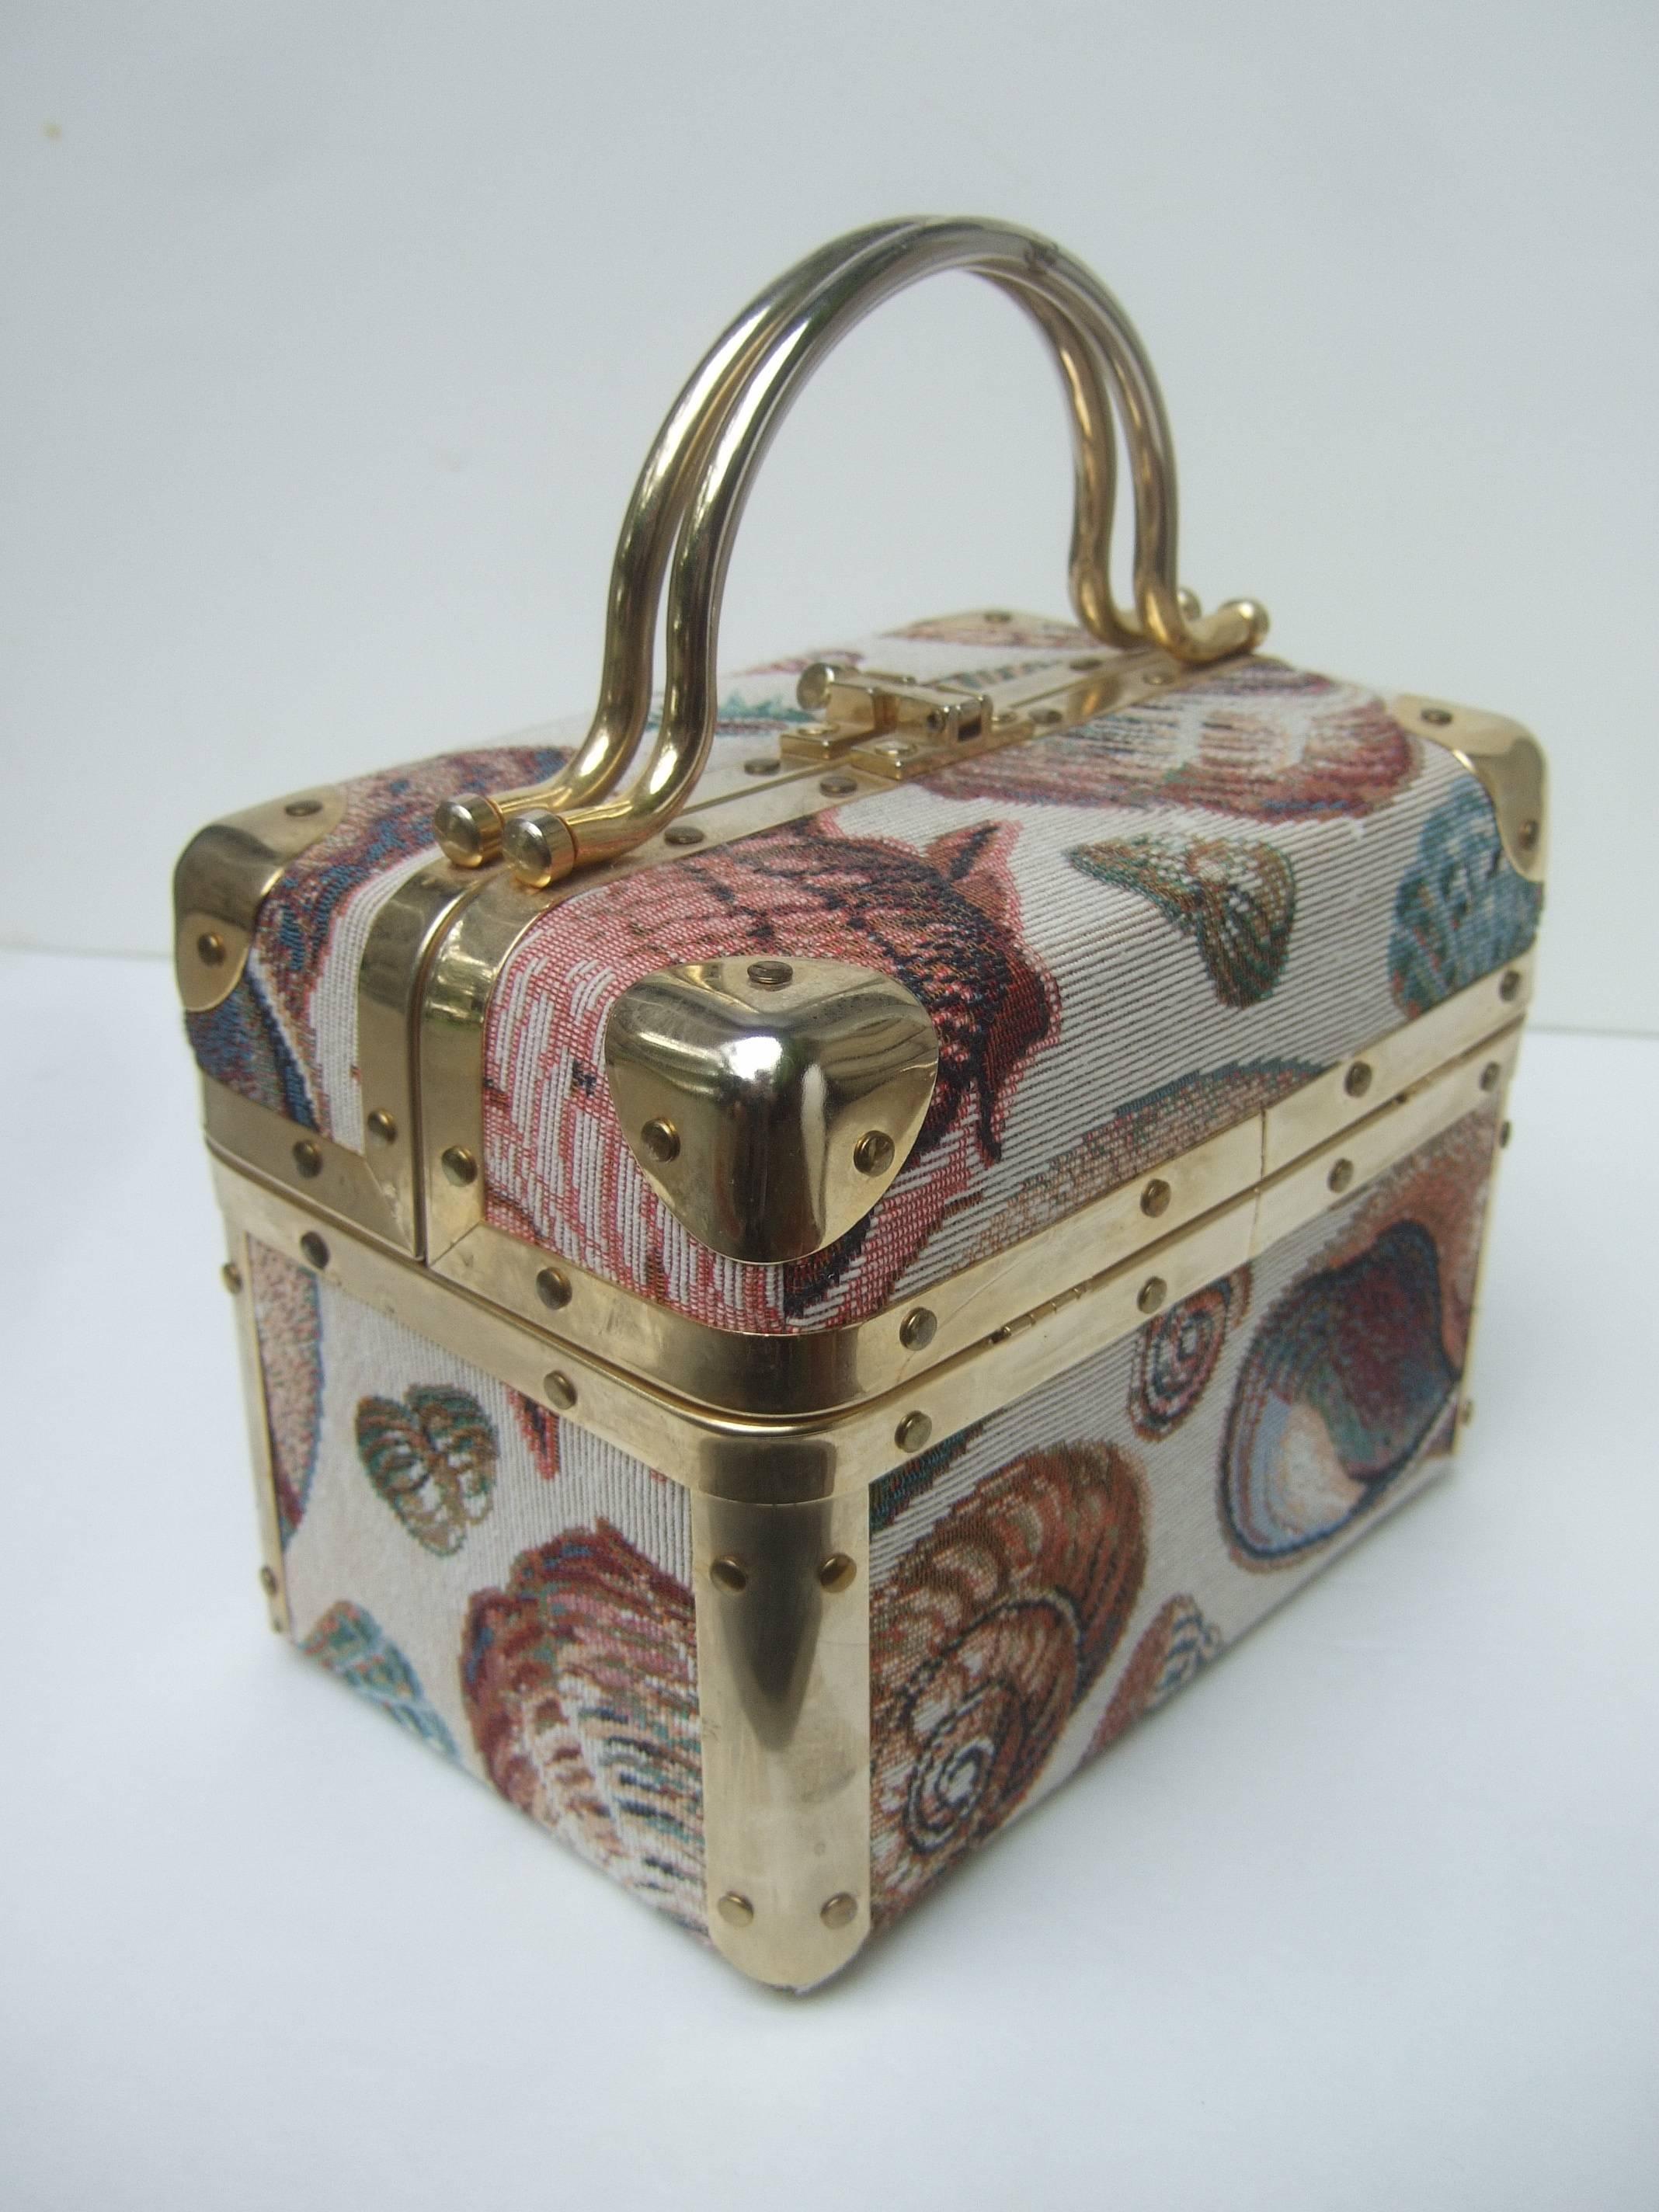 Sea Life tapestry train case handbag
The stylish handbag is covered with 
cloth covering illustrated with a 
collection of various types of sea 
shells on all sides 

The posh handbag is designed with 
gilt metal swivel handles and